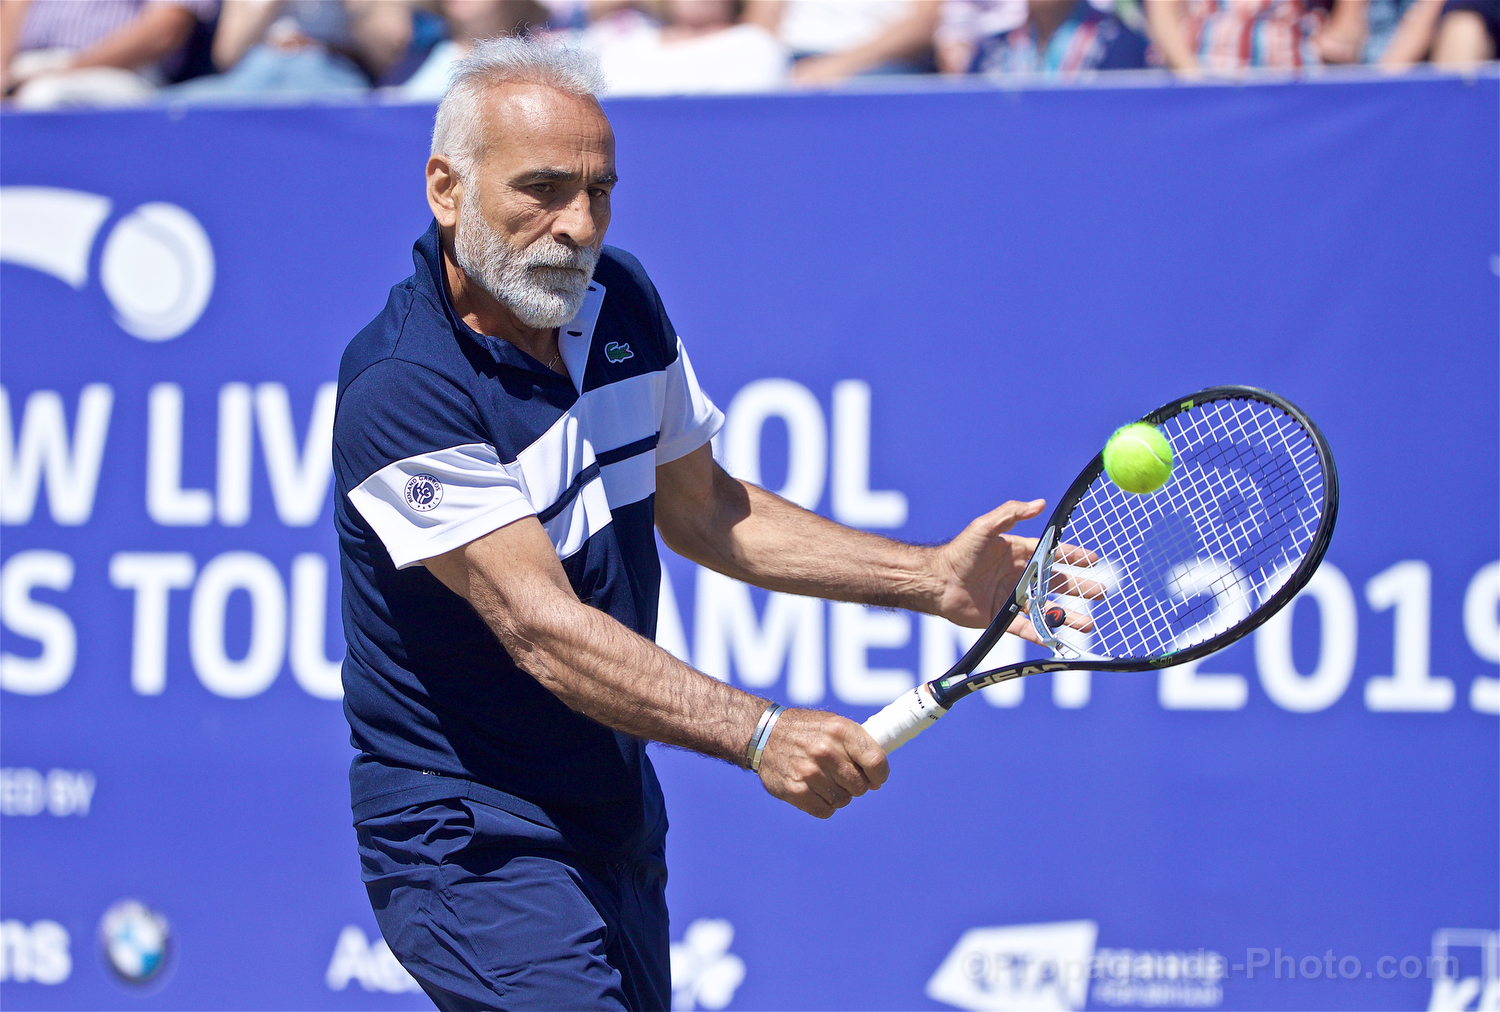 LIVERPOOL, ENGLAND - Friday, June 21, 2019: Mansour Bahrami (IRN) during Day Two of the Liverpool International Tennis Tournament 2019 at the Liverpool Cricket Club. (Pic by David Rawcliffe/Propaganda)